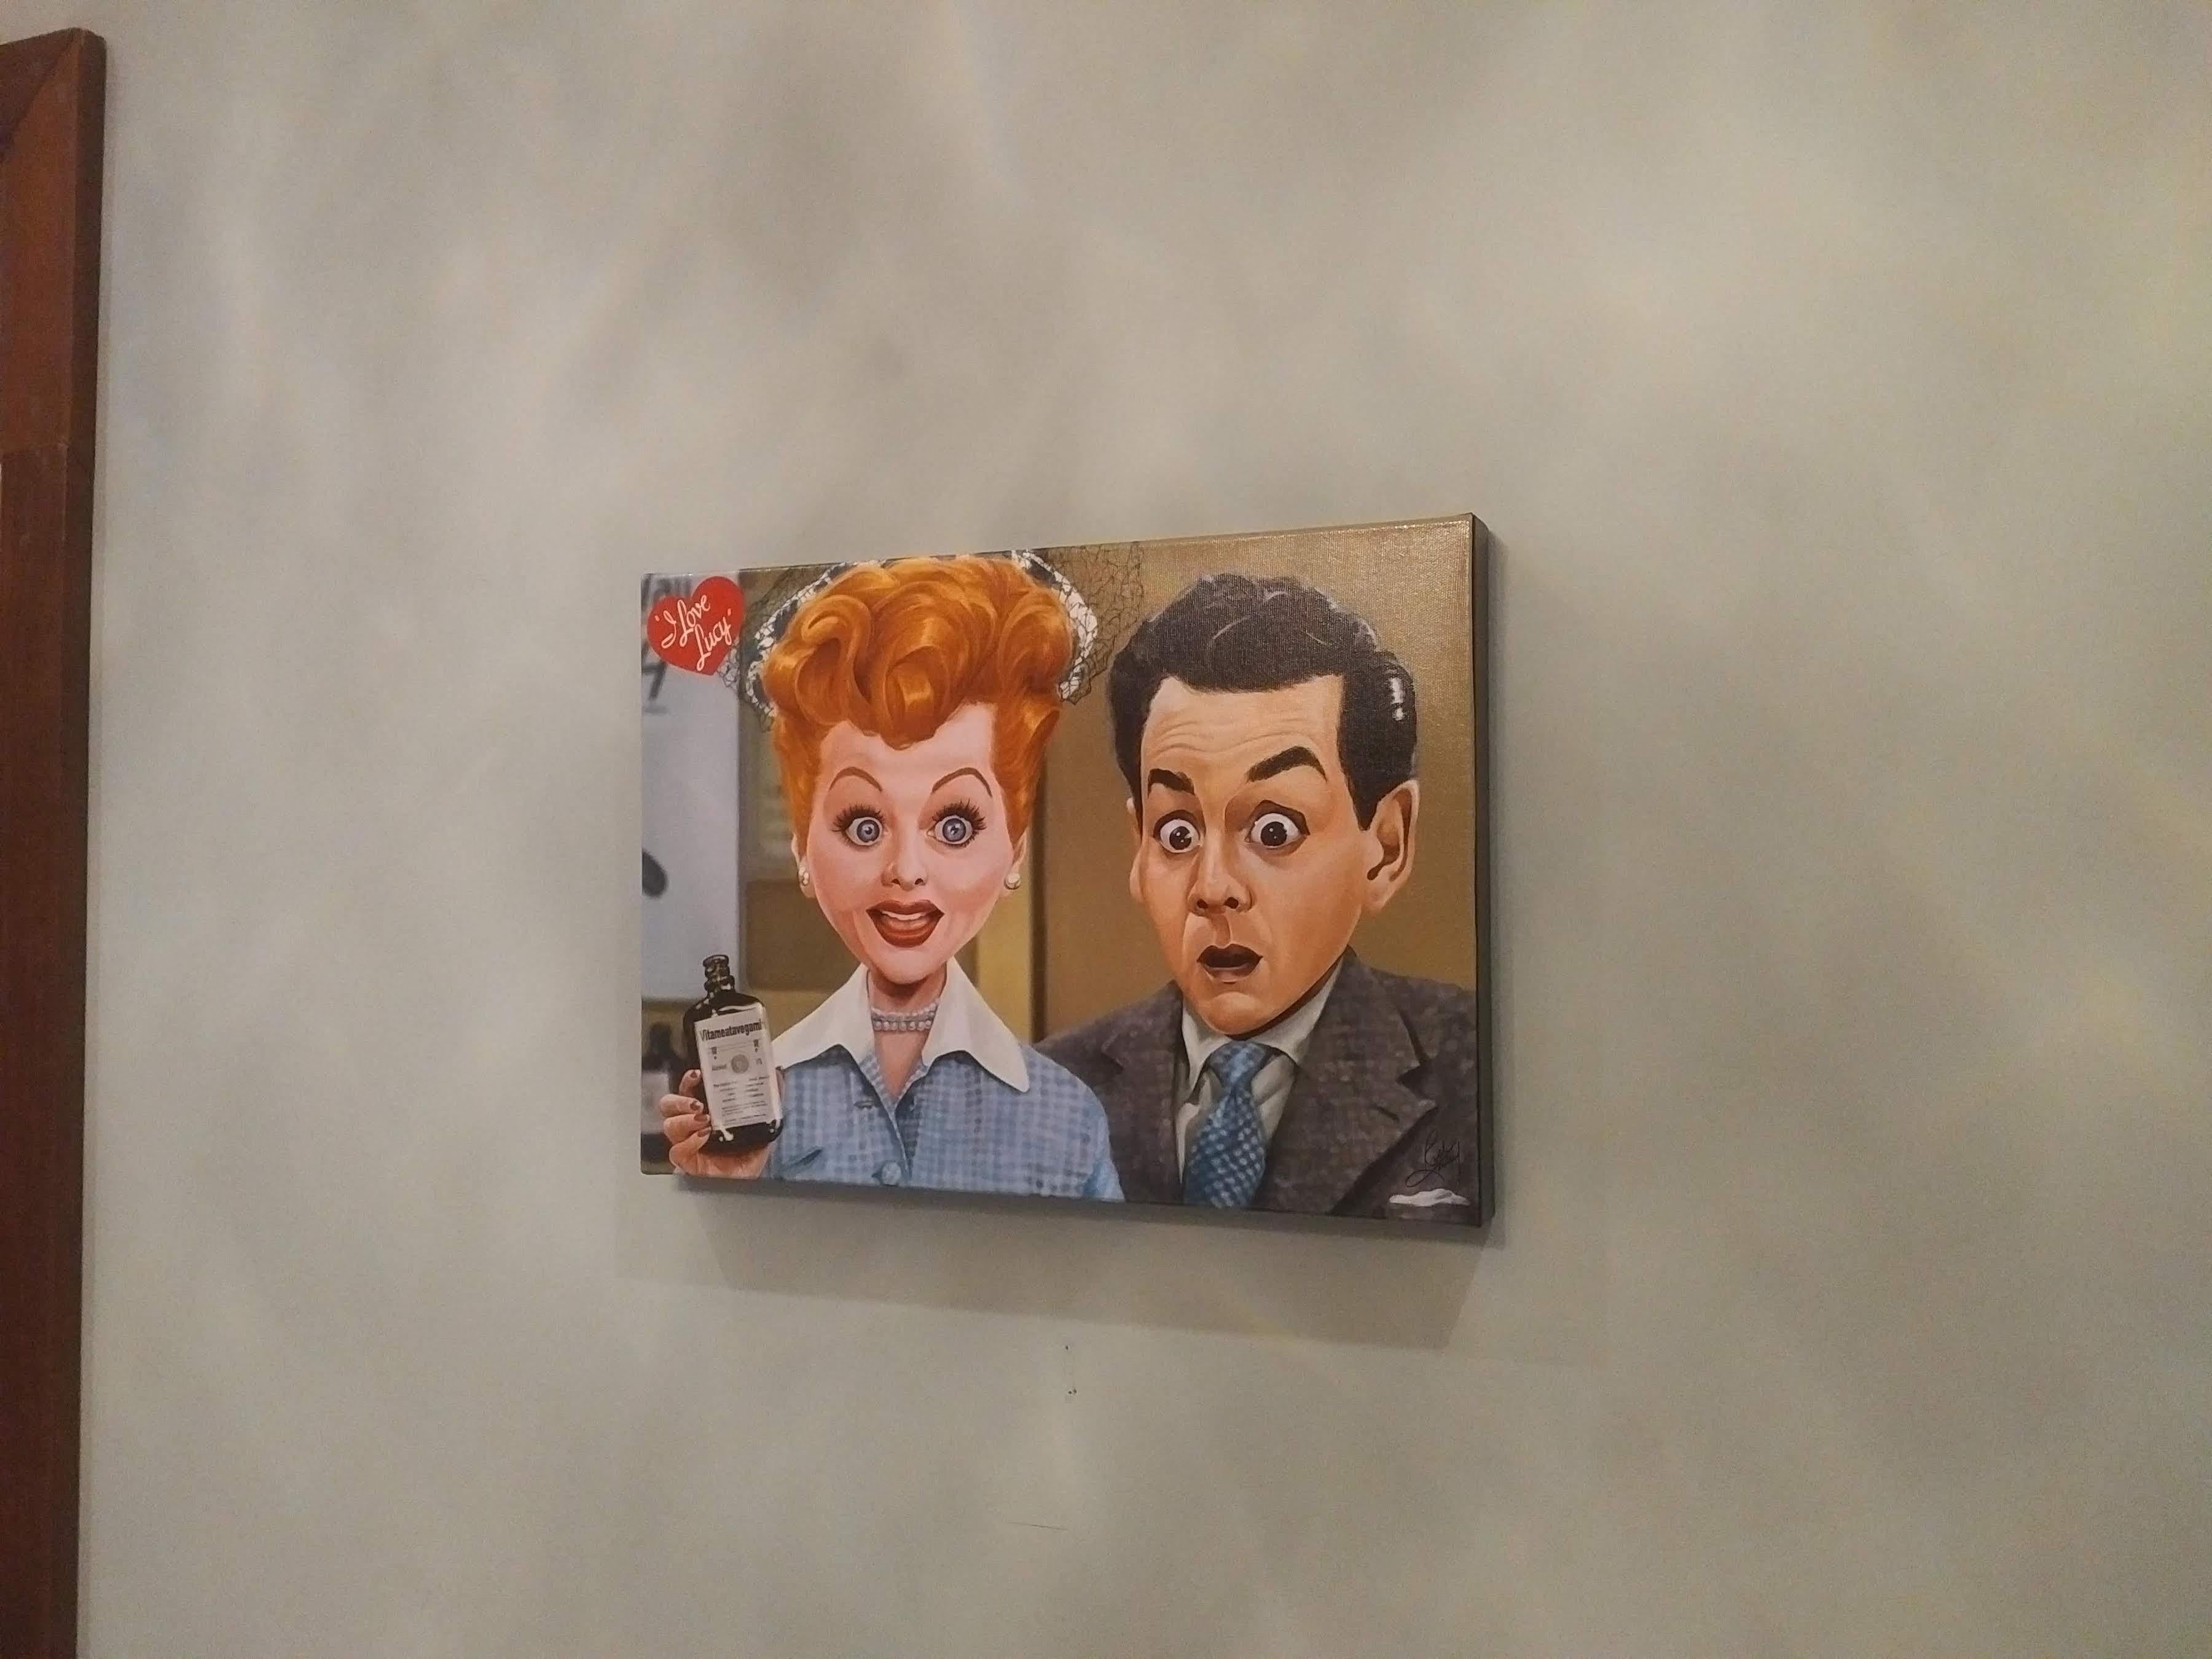 Vitameatavegamin Licensed I Love Lucy Giclee #8/30 - Contemporary Print by Rich Conley